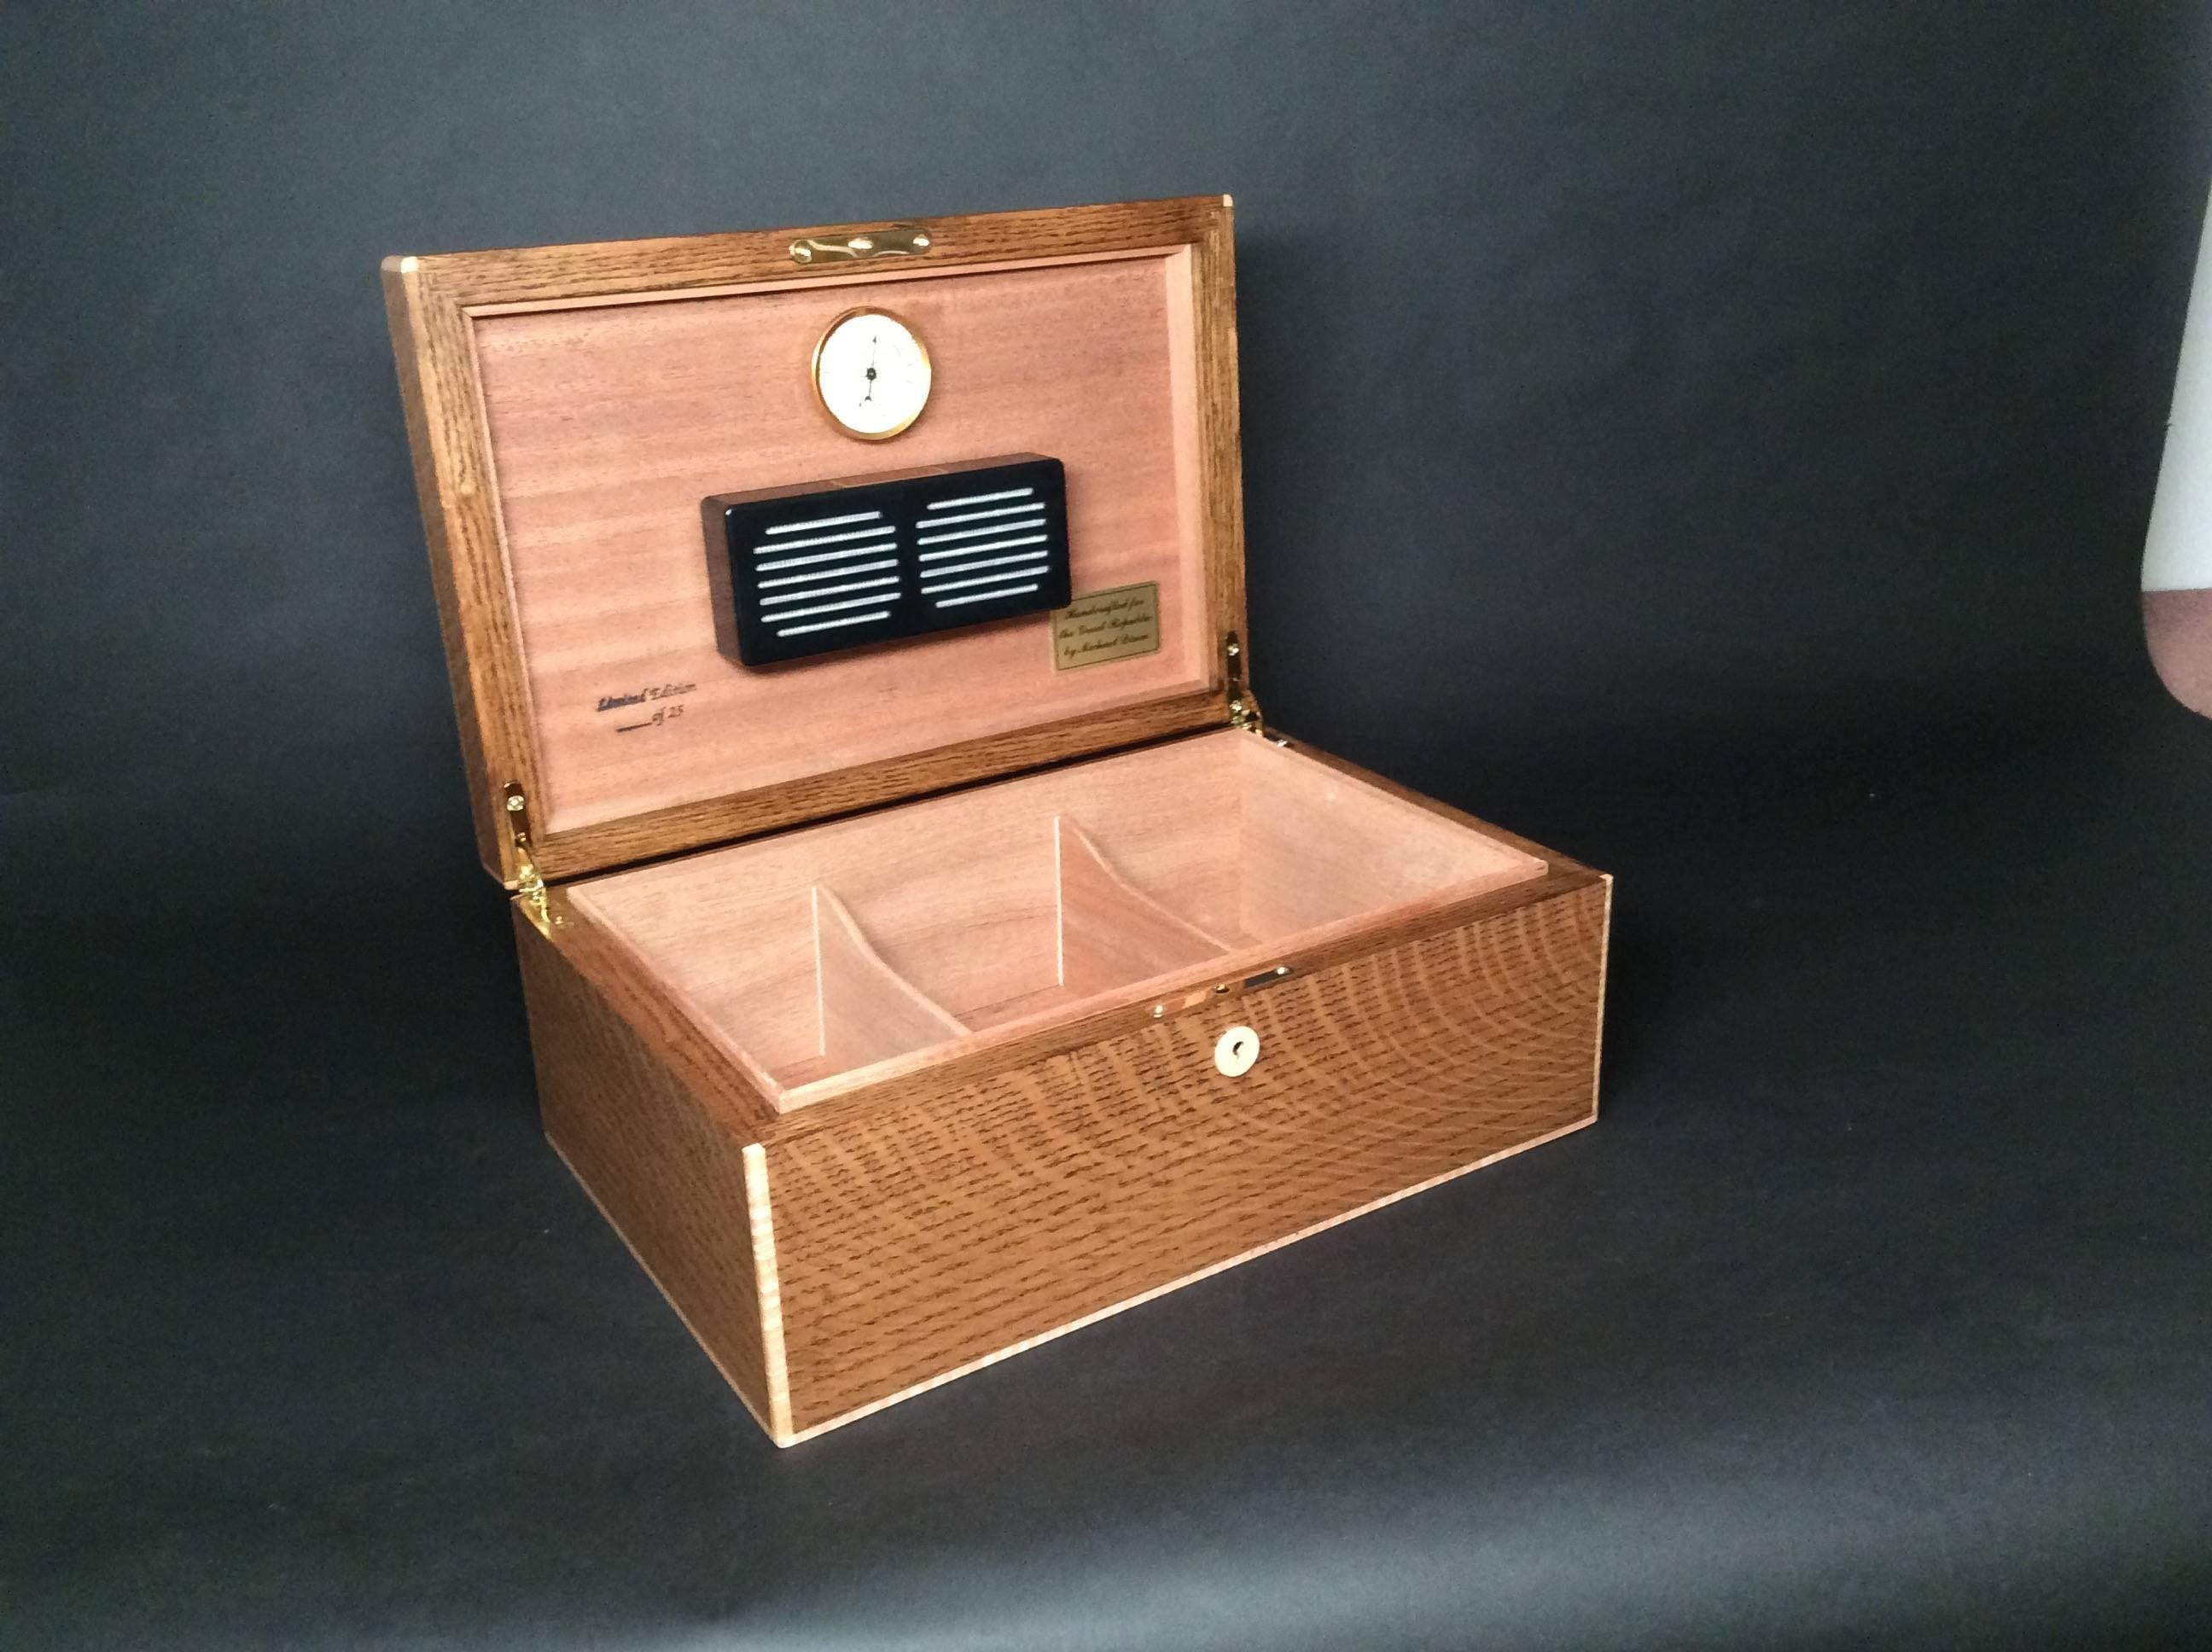 A handsome handcrafted cigar humidor, made from “rift sawn” white oak. This humidor is an exclusive product to The Great Republic, created in a limited edition of only 25. The lid of this distinctive humidor is hand-stamped with a facsimile seal of